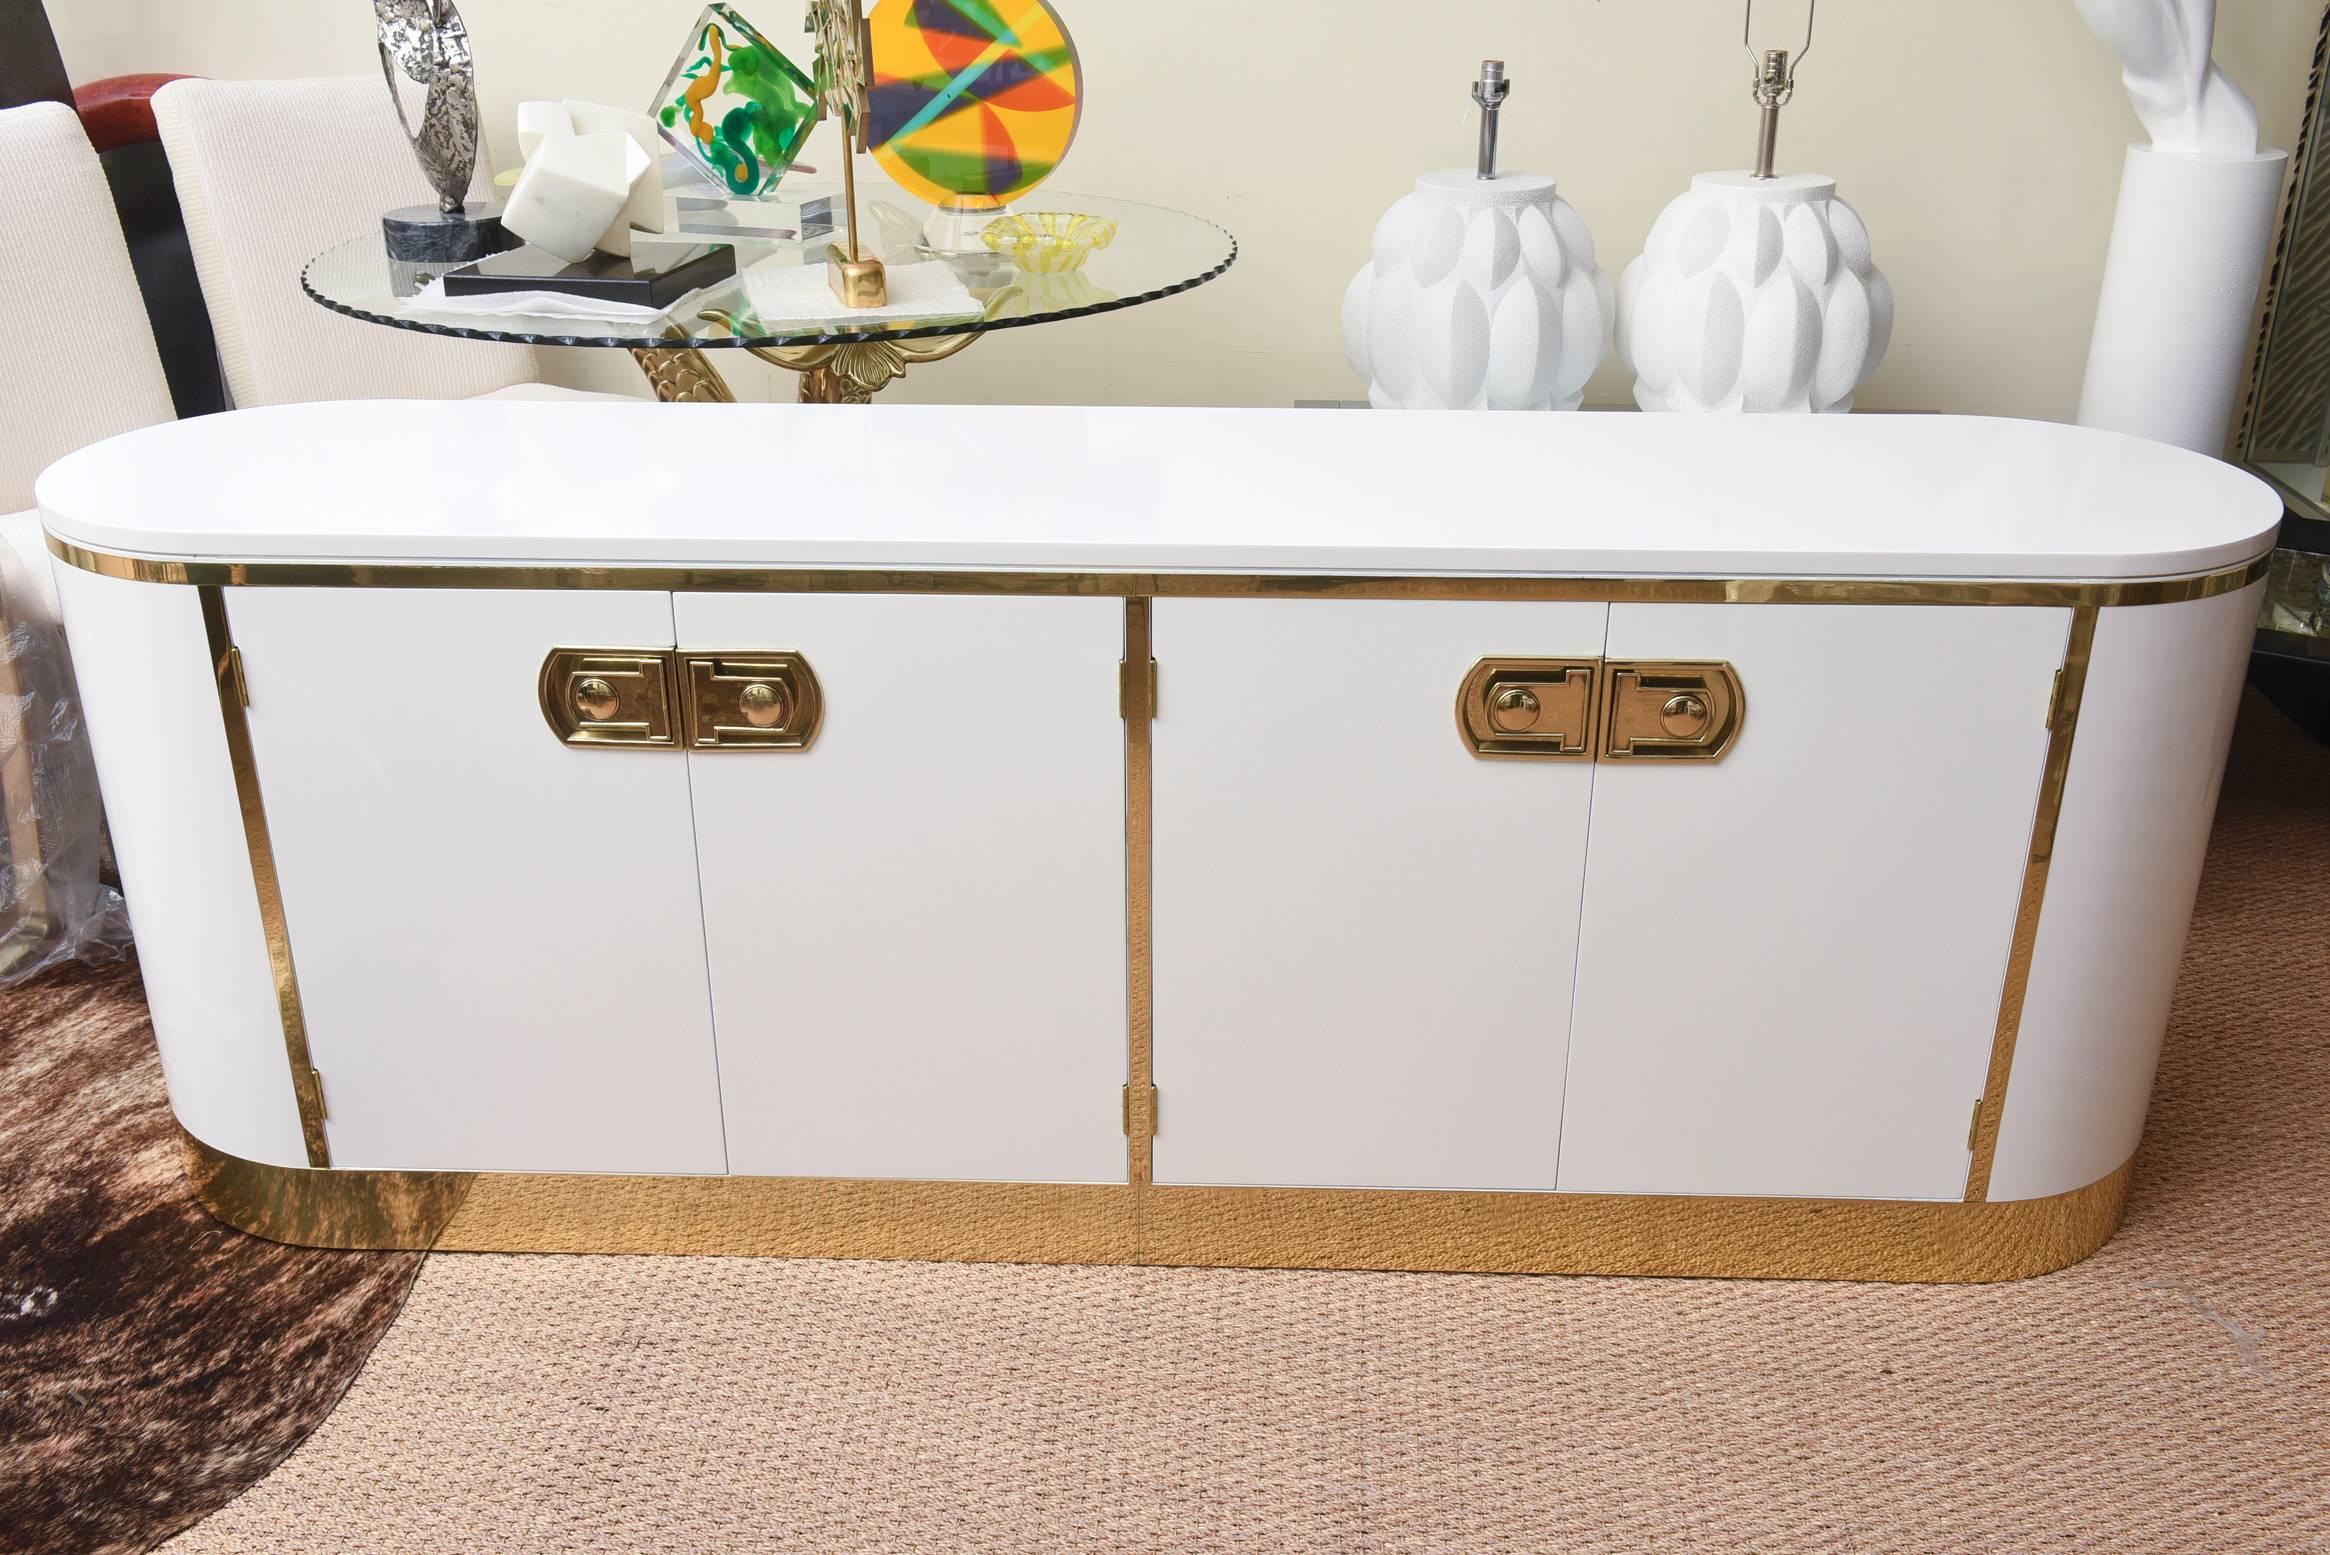 The round radius corners of this chic modern cabinet is accented with original solid brass hardware and banding.
It has been beautifully restored to almost perfection.
It still remains timeless and forever.
      